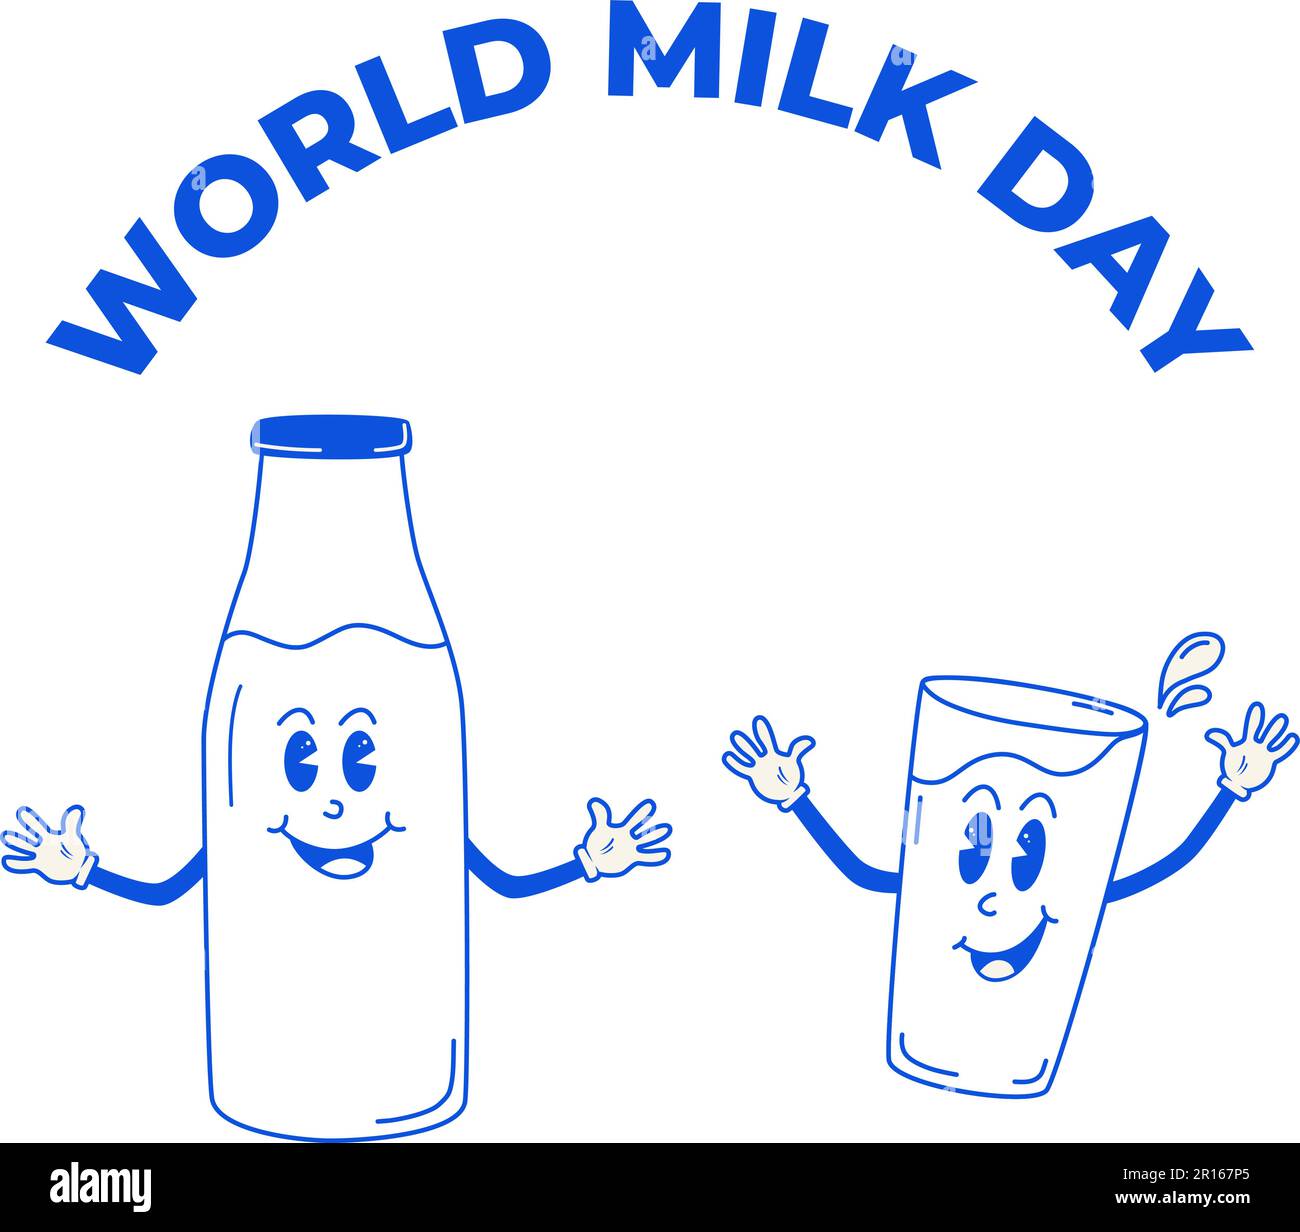 World Milk Day. Silhouette of milk bottle and glass on beige background in groovy style. Holiday banner on June 1. Stock Vector